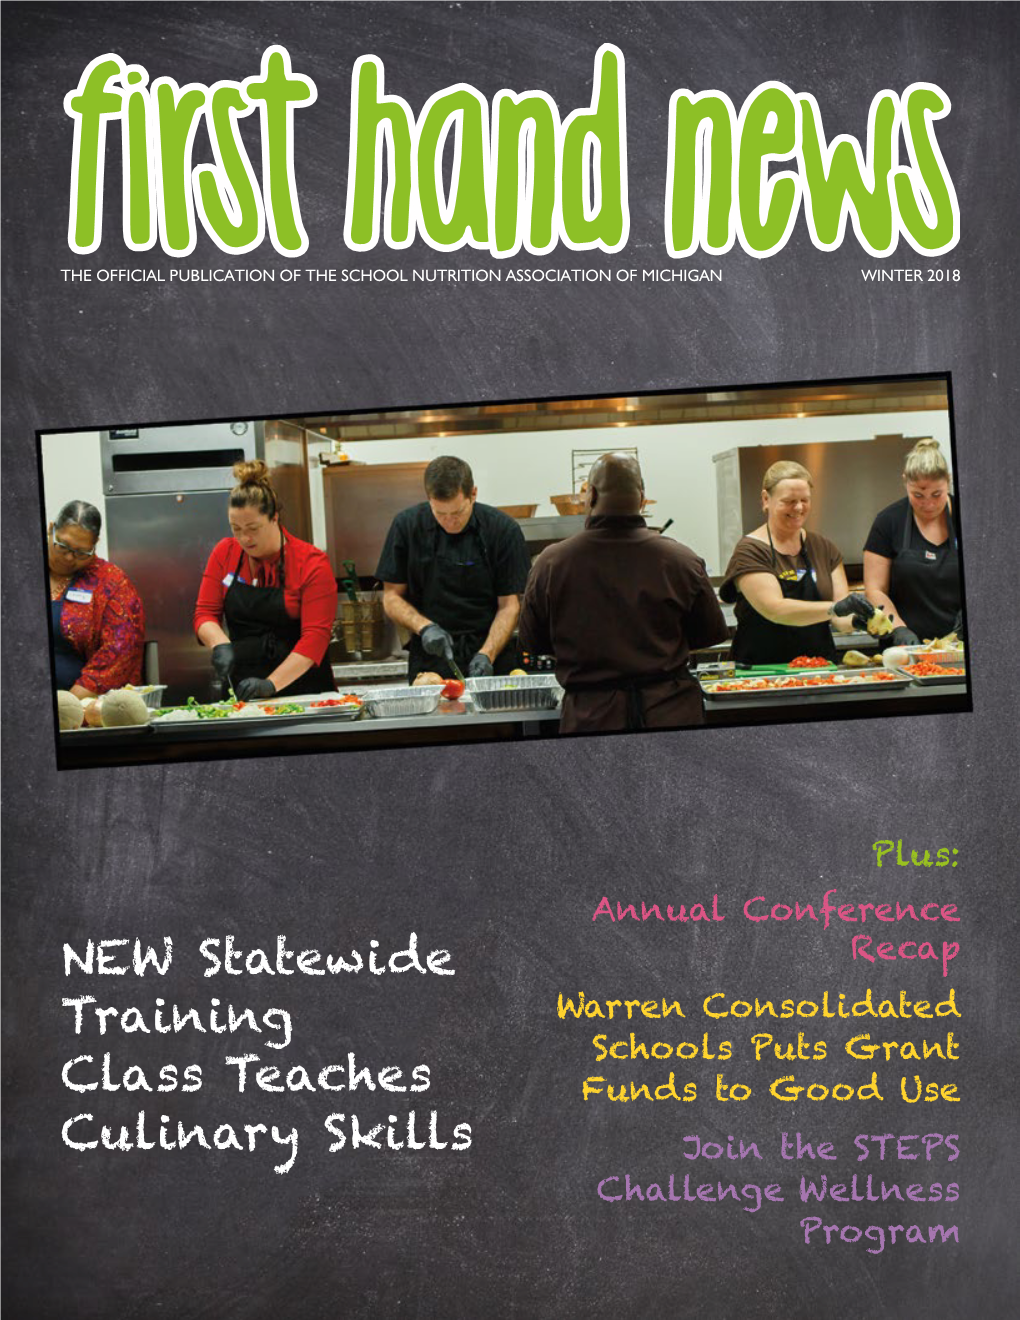 The Official Publication of the School Nutrition Association of Michigan Winter 2018